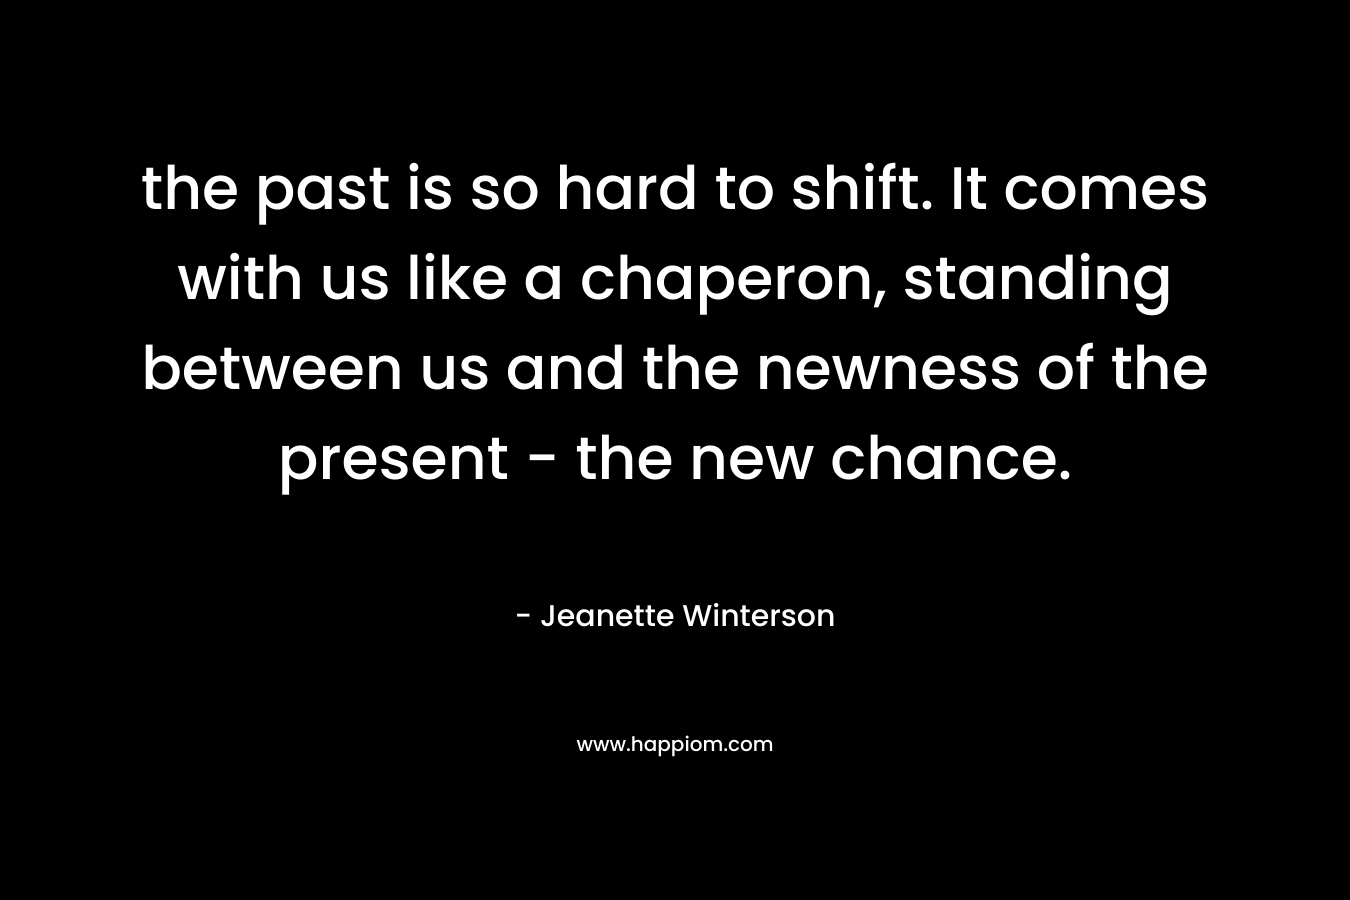 the past is so hard to shift. It comes with us like a chaperon, standing between us and the newness of the present - the new chance.